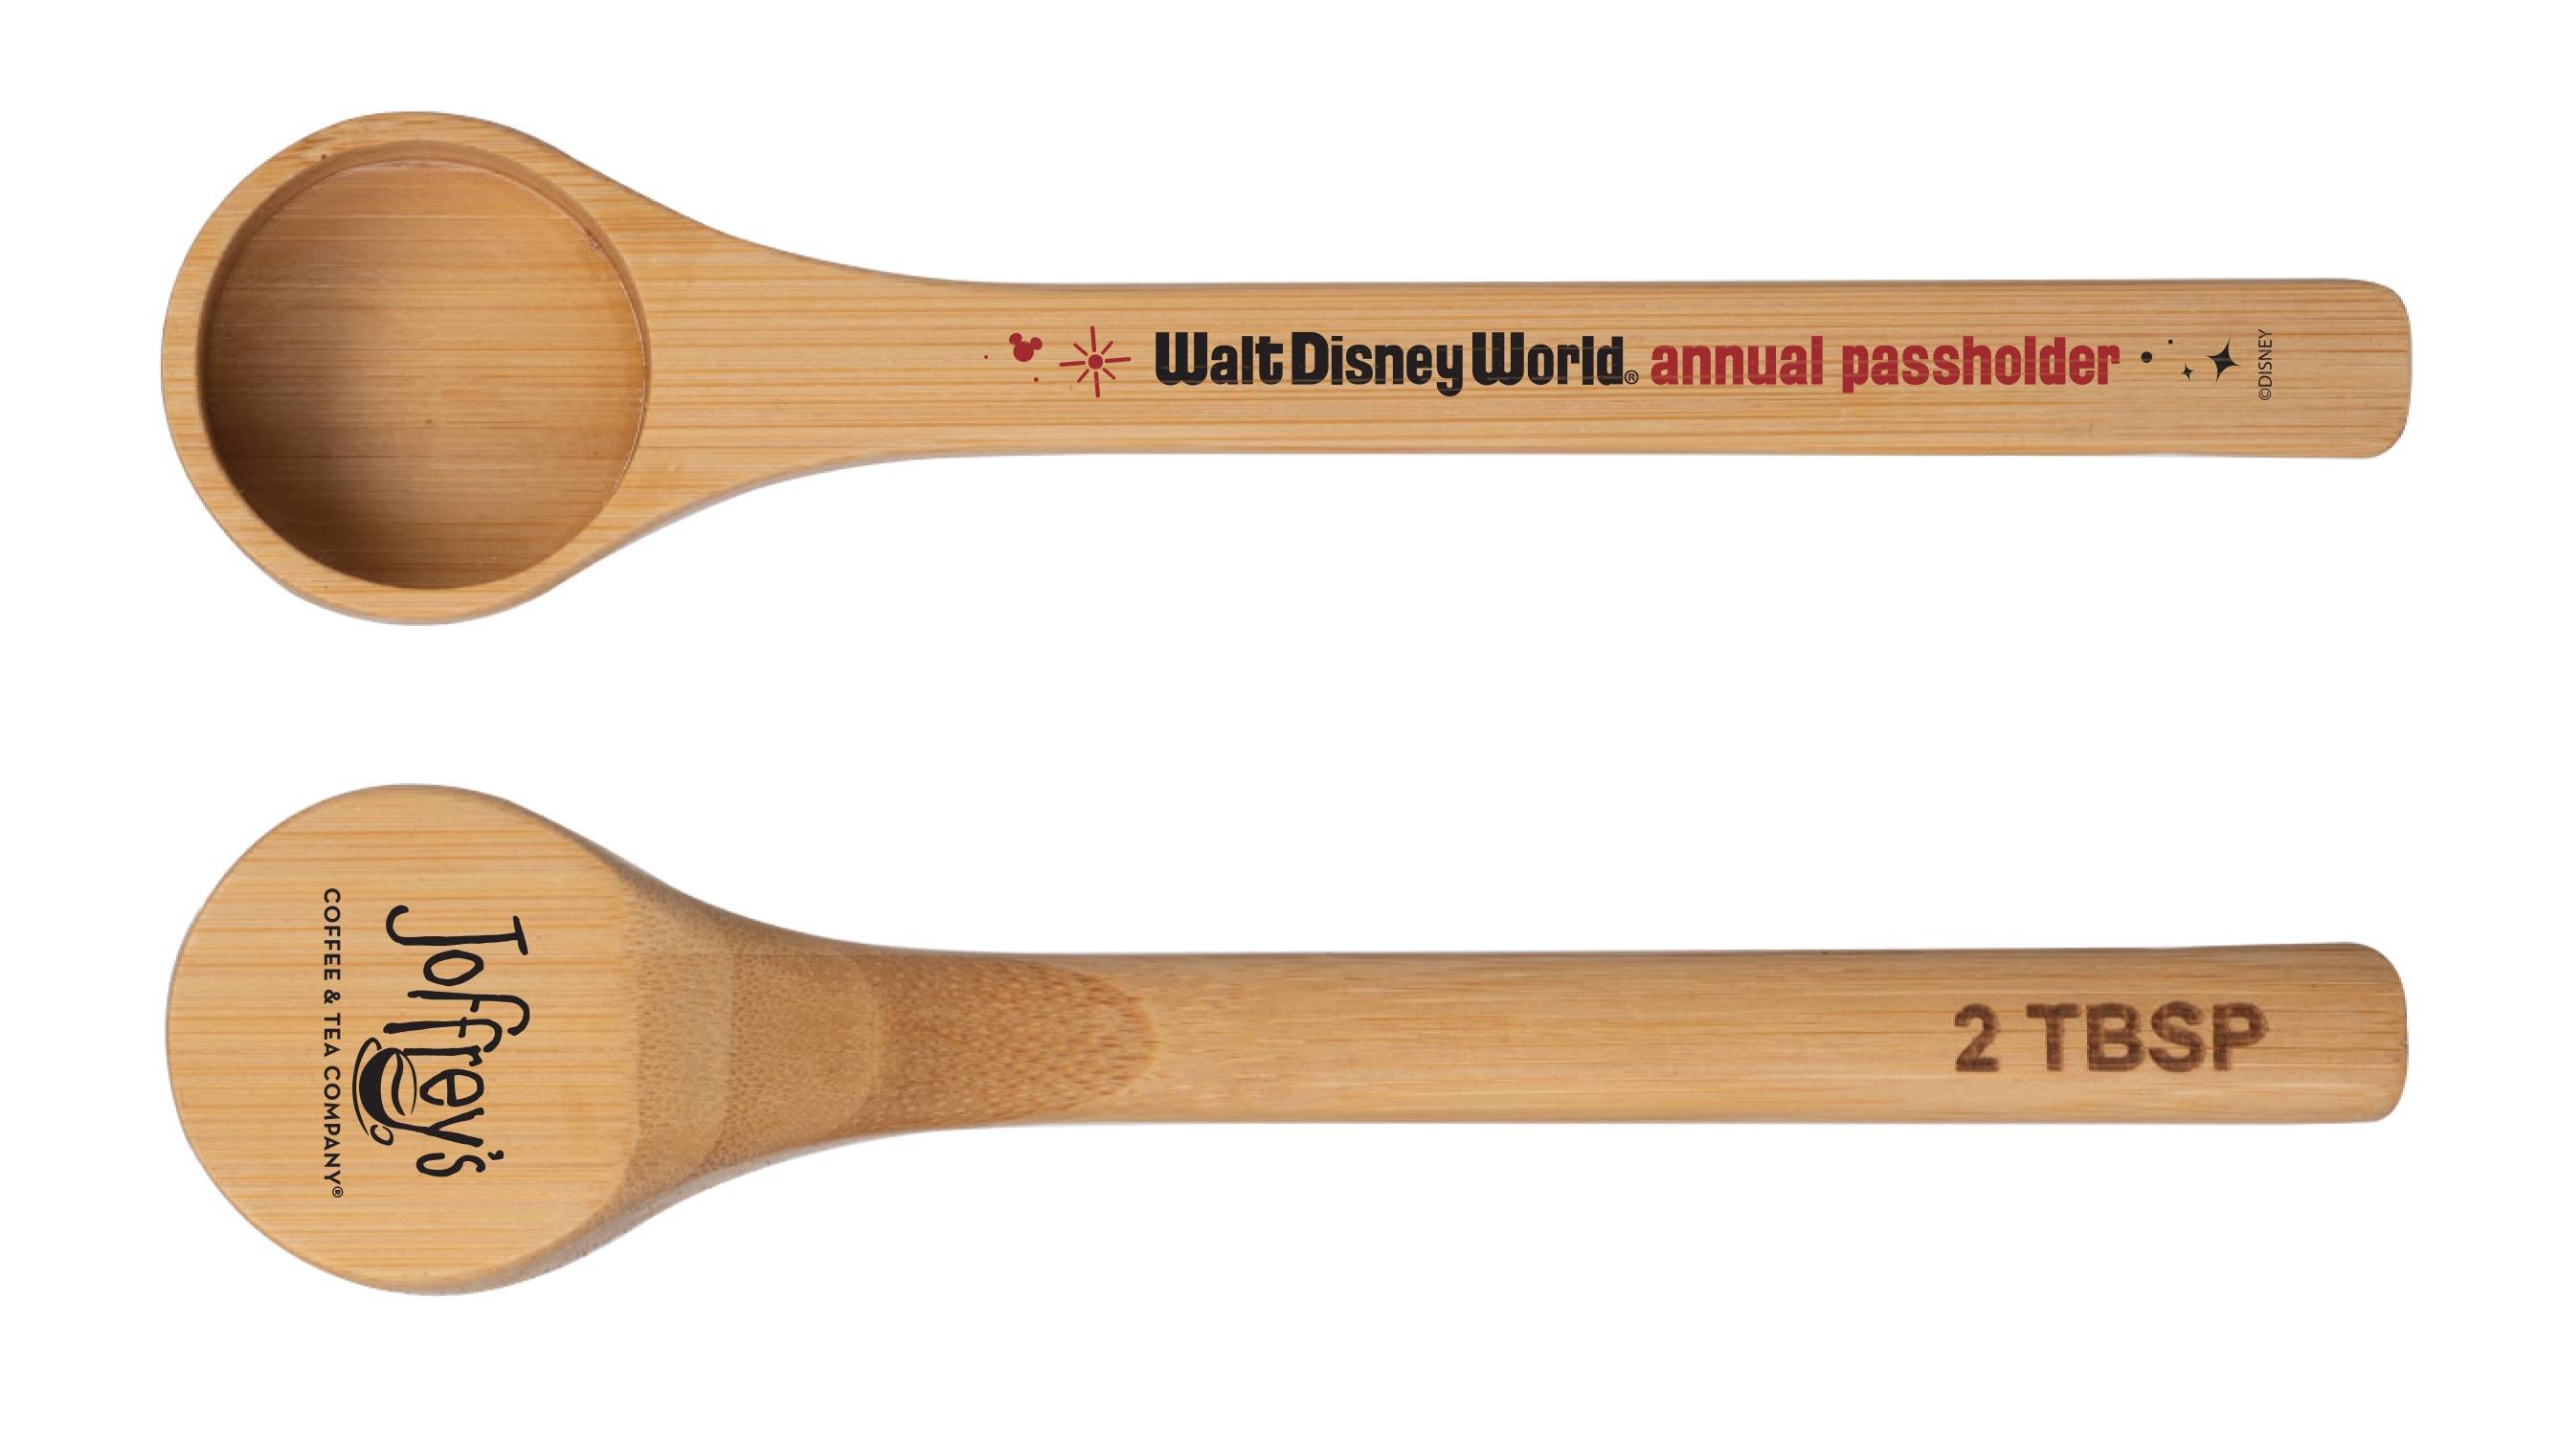 Walt Disney World Annual Passholders can get a free Joffrey's Coffee Scoop with purchase